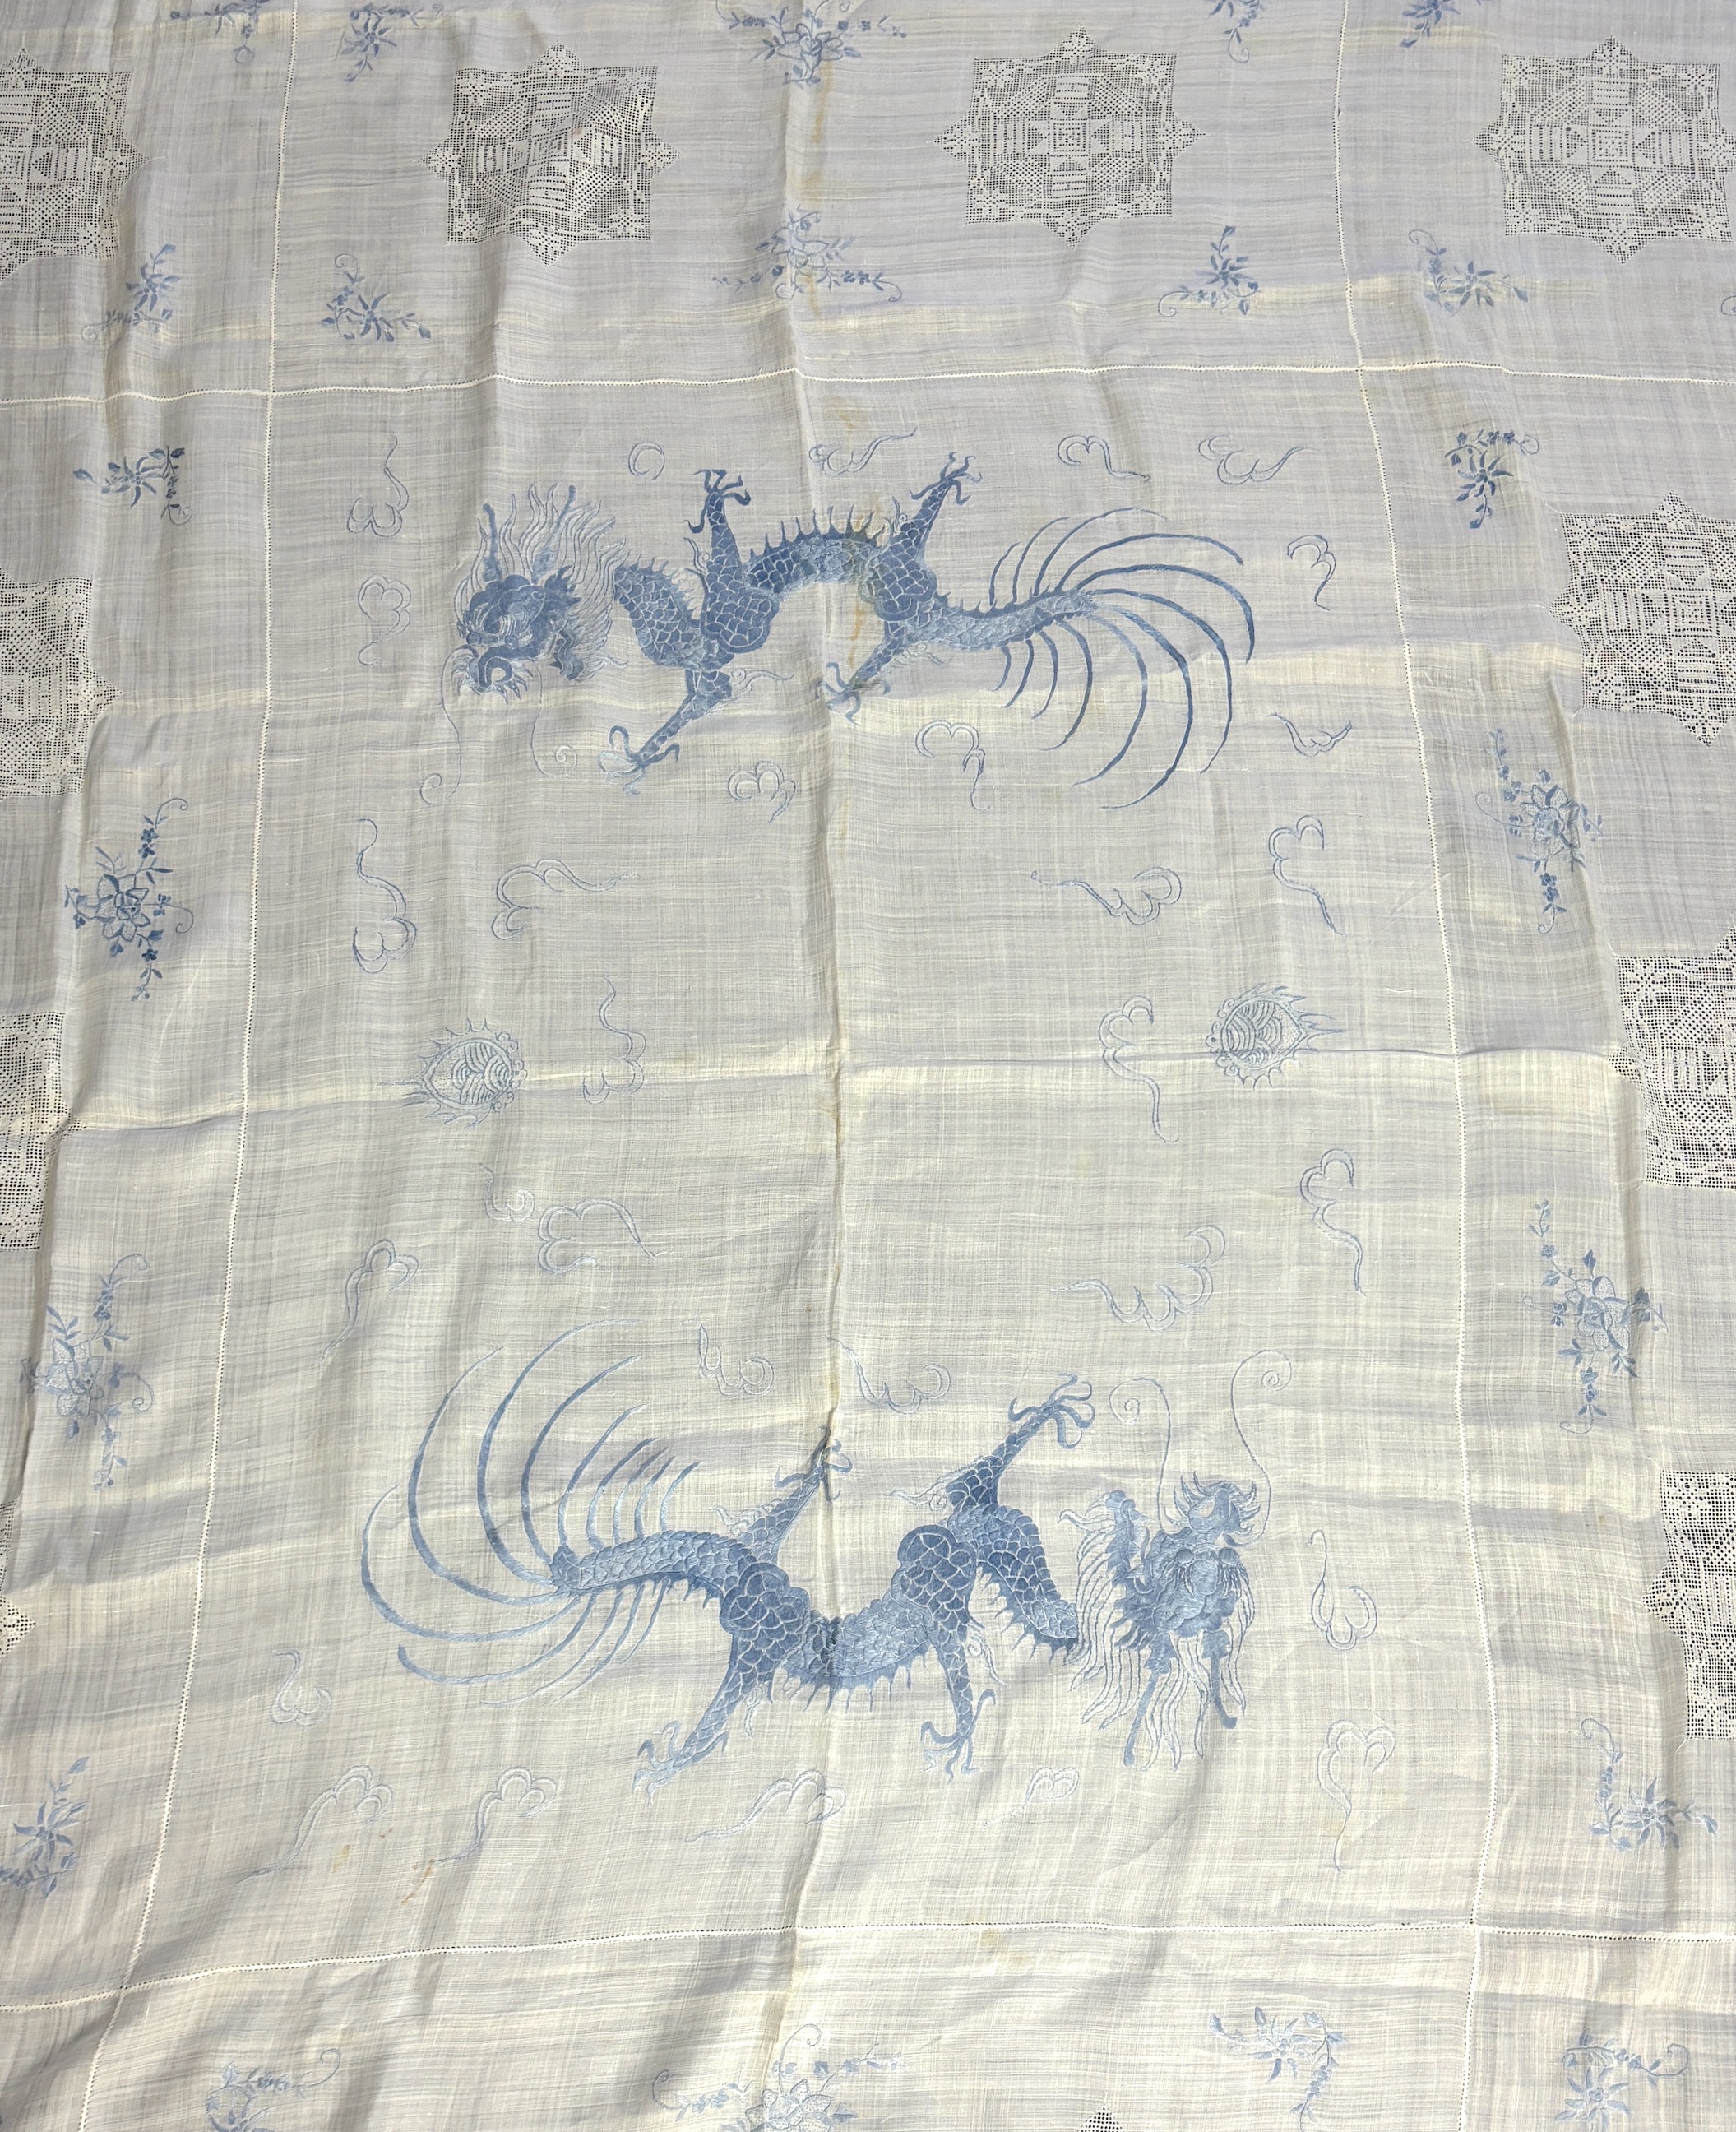 Chinese dragon and floral embroidered linen comprising two Chinese hand embroidered table cloths, both embroidered with blue dragons and flowers, together with a similar embroidered pillow case, a smaller cloth with whit